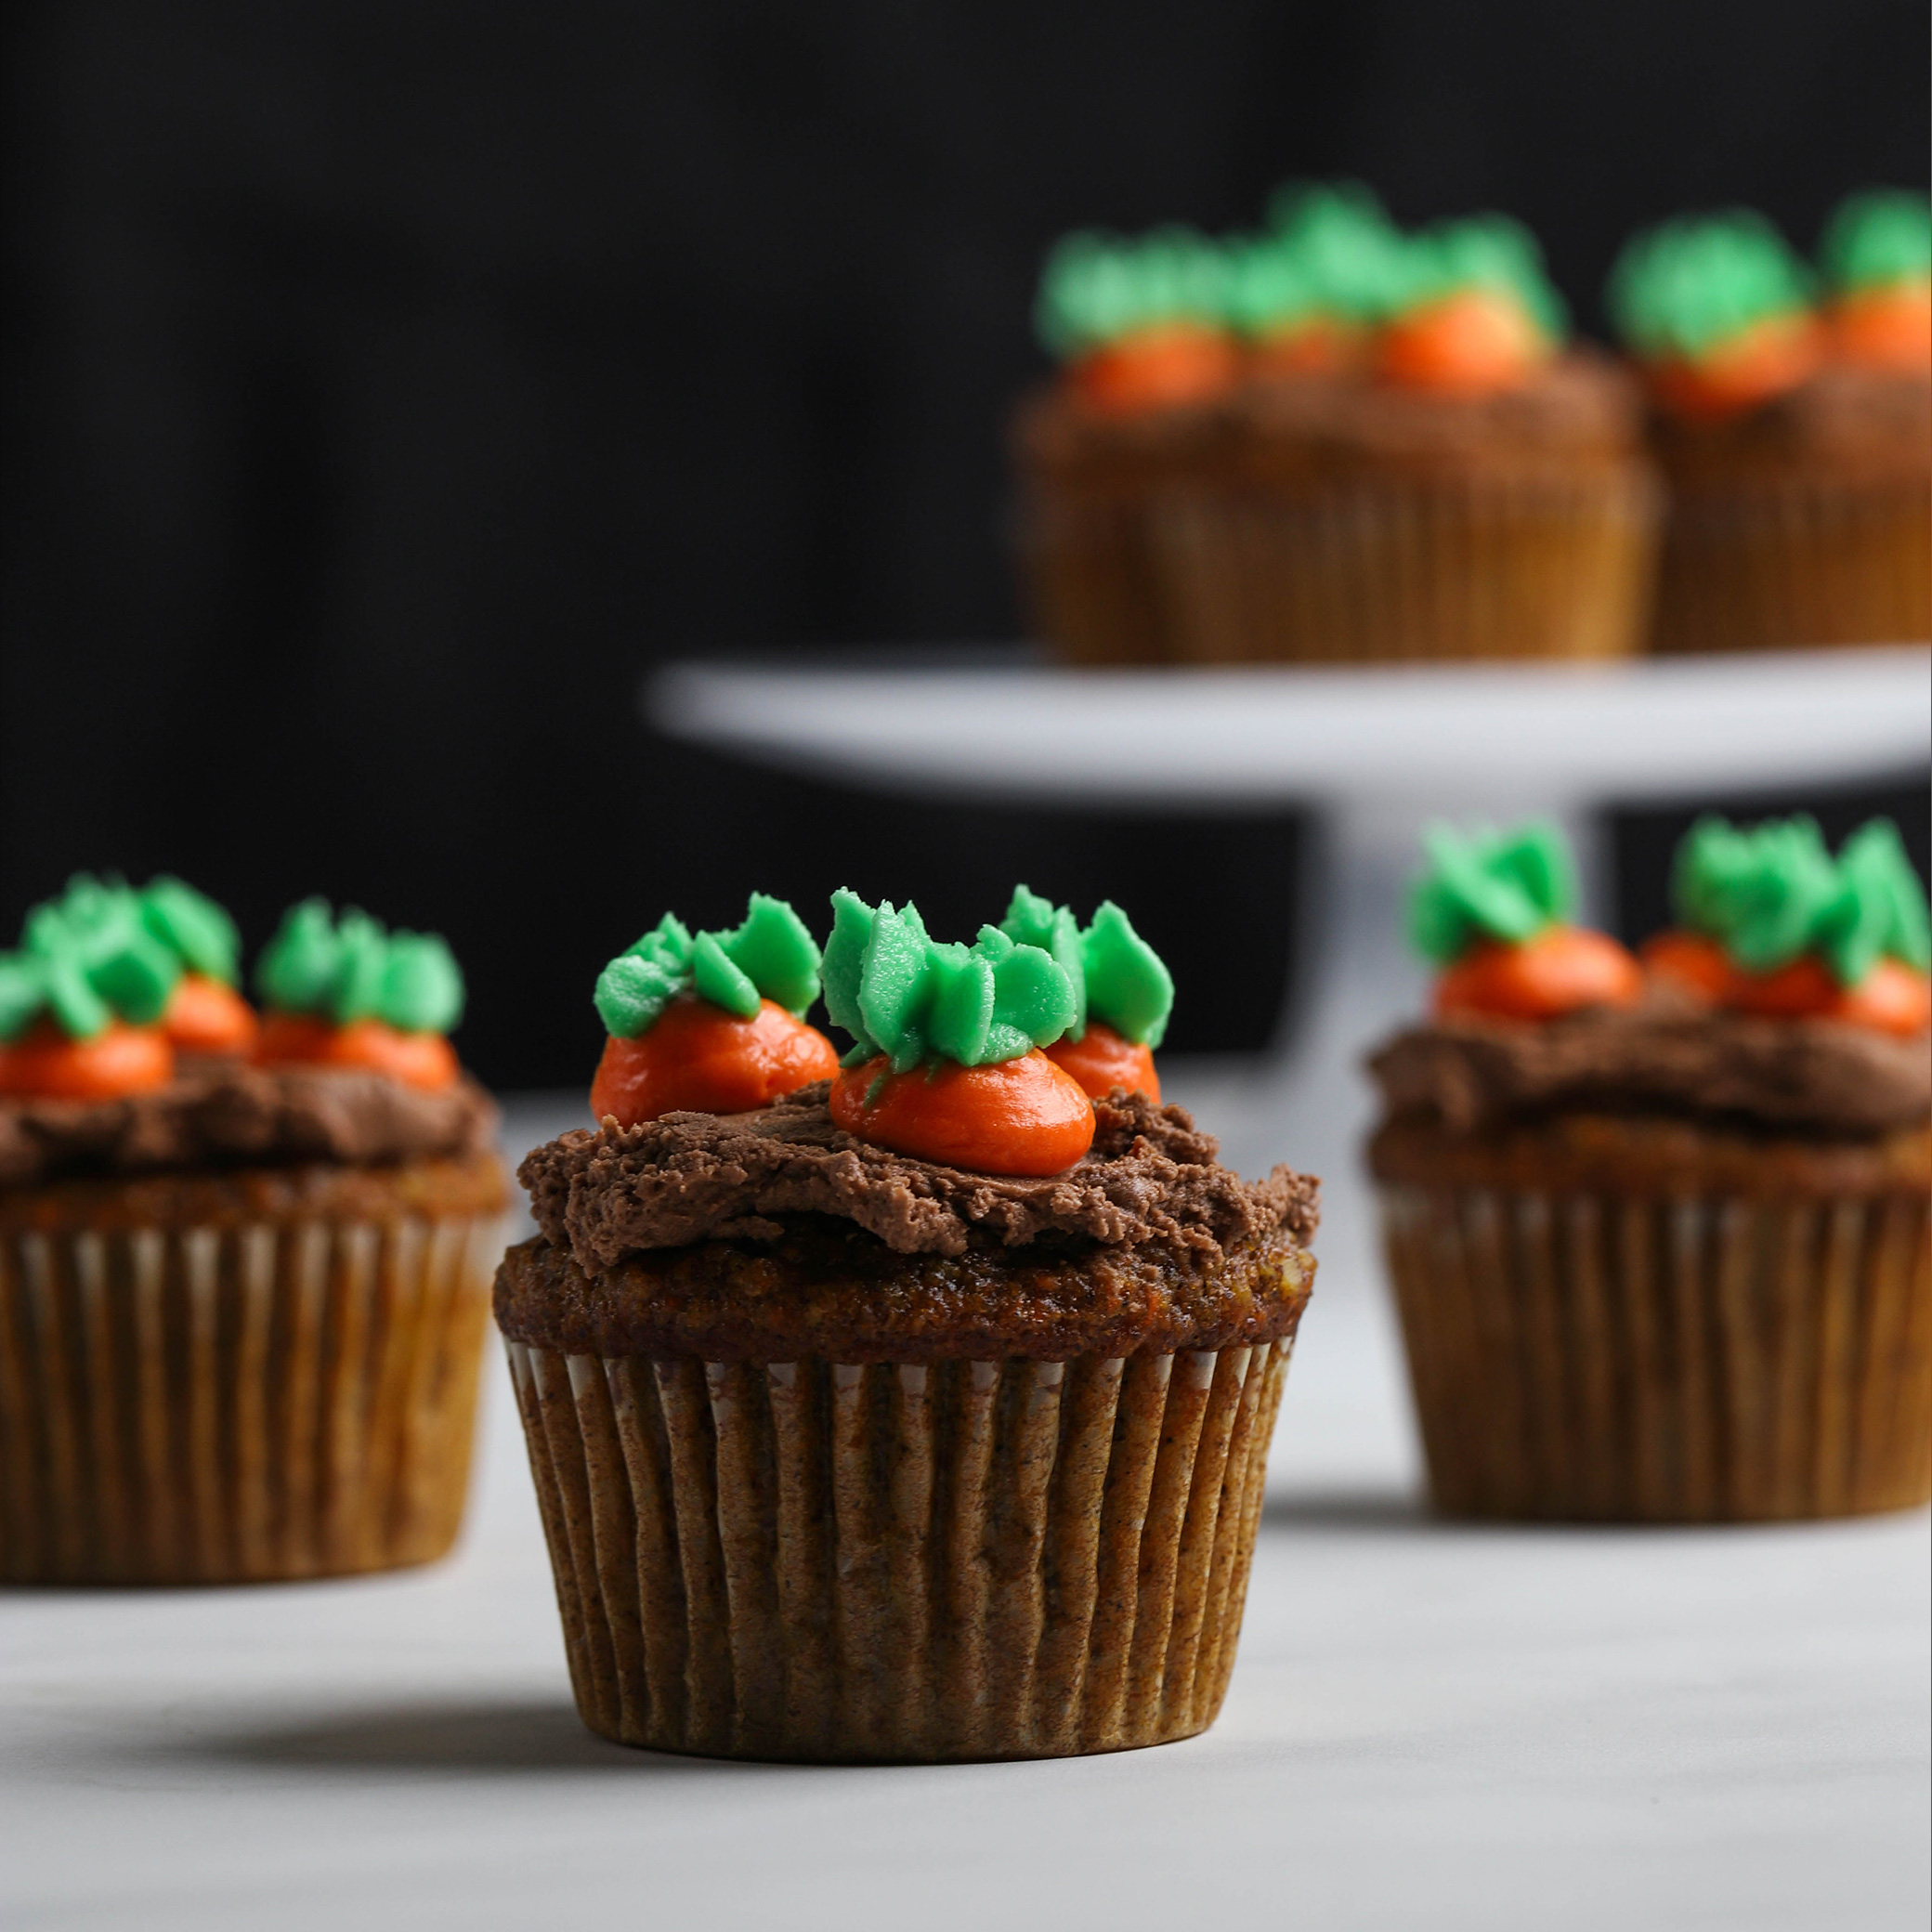 Carrot Cupcakes Recipe: How to Make It